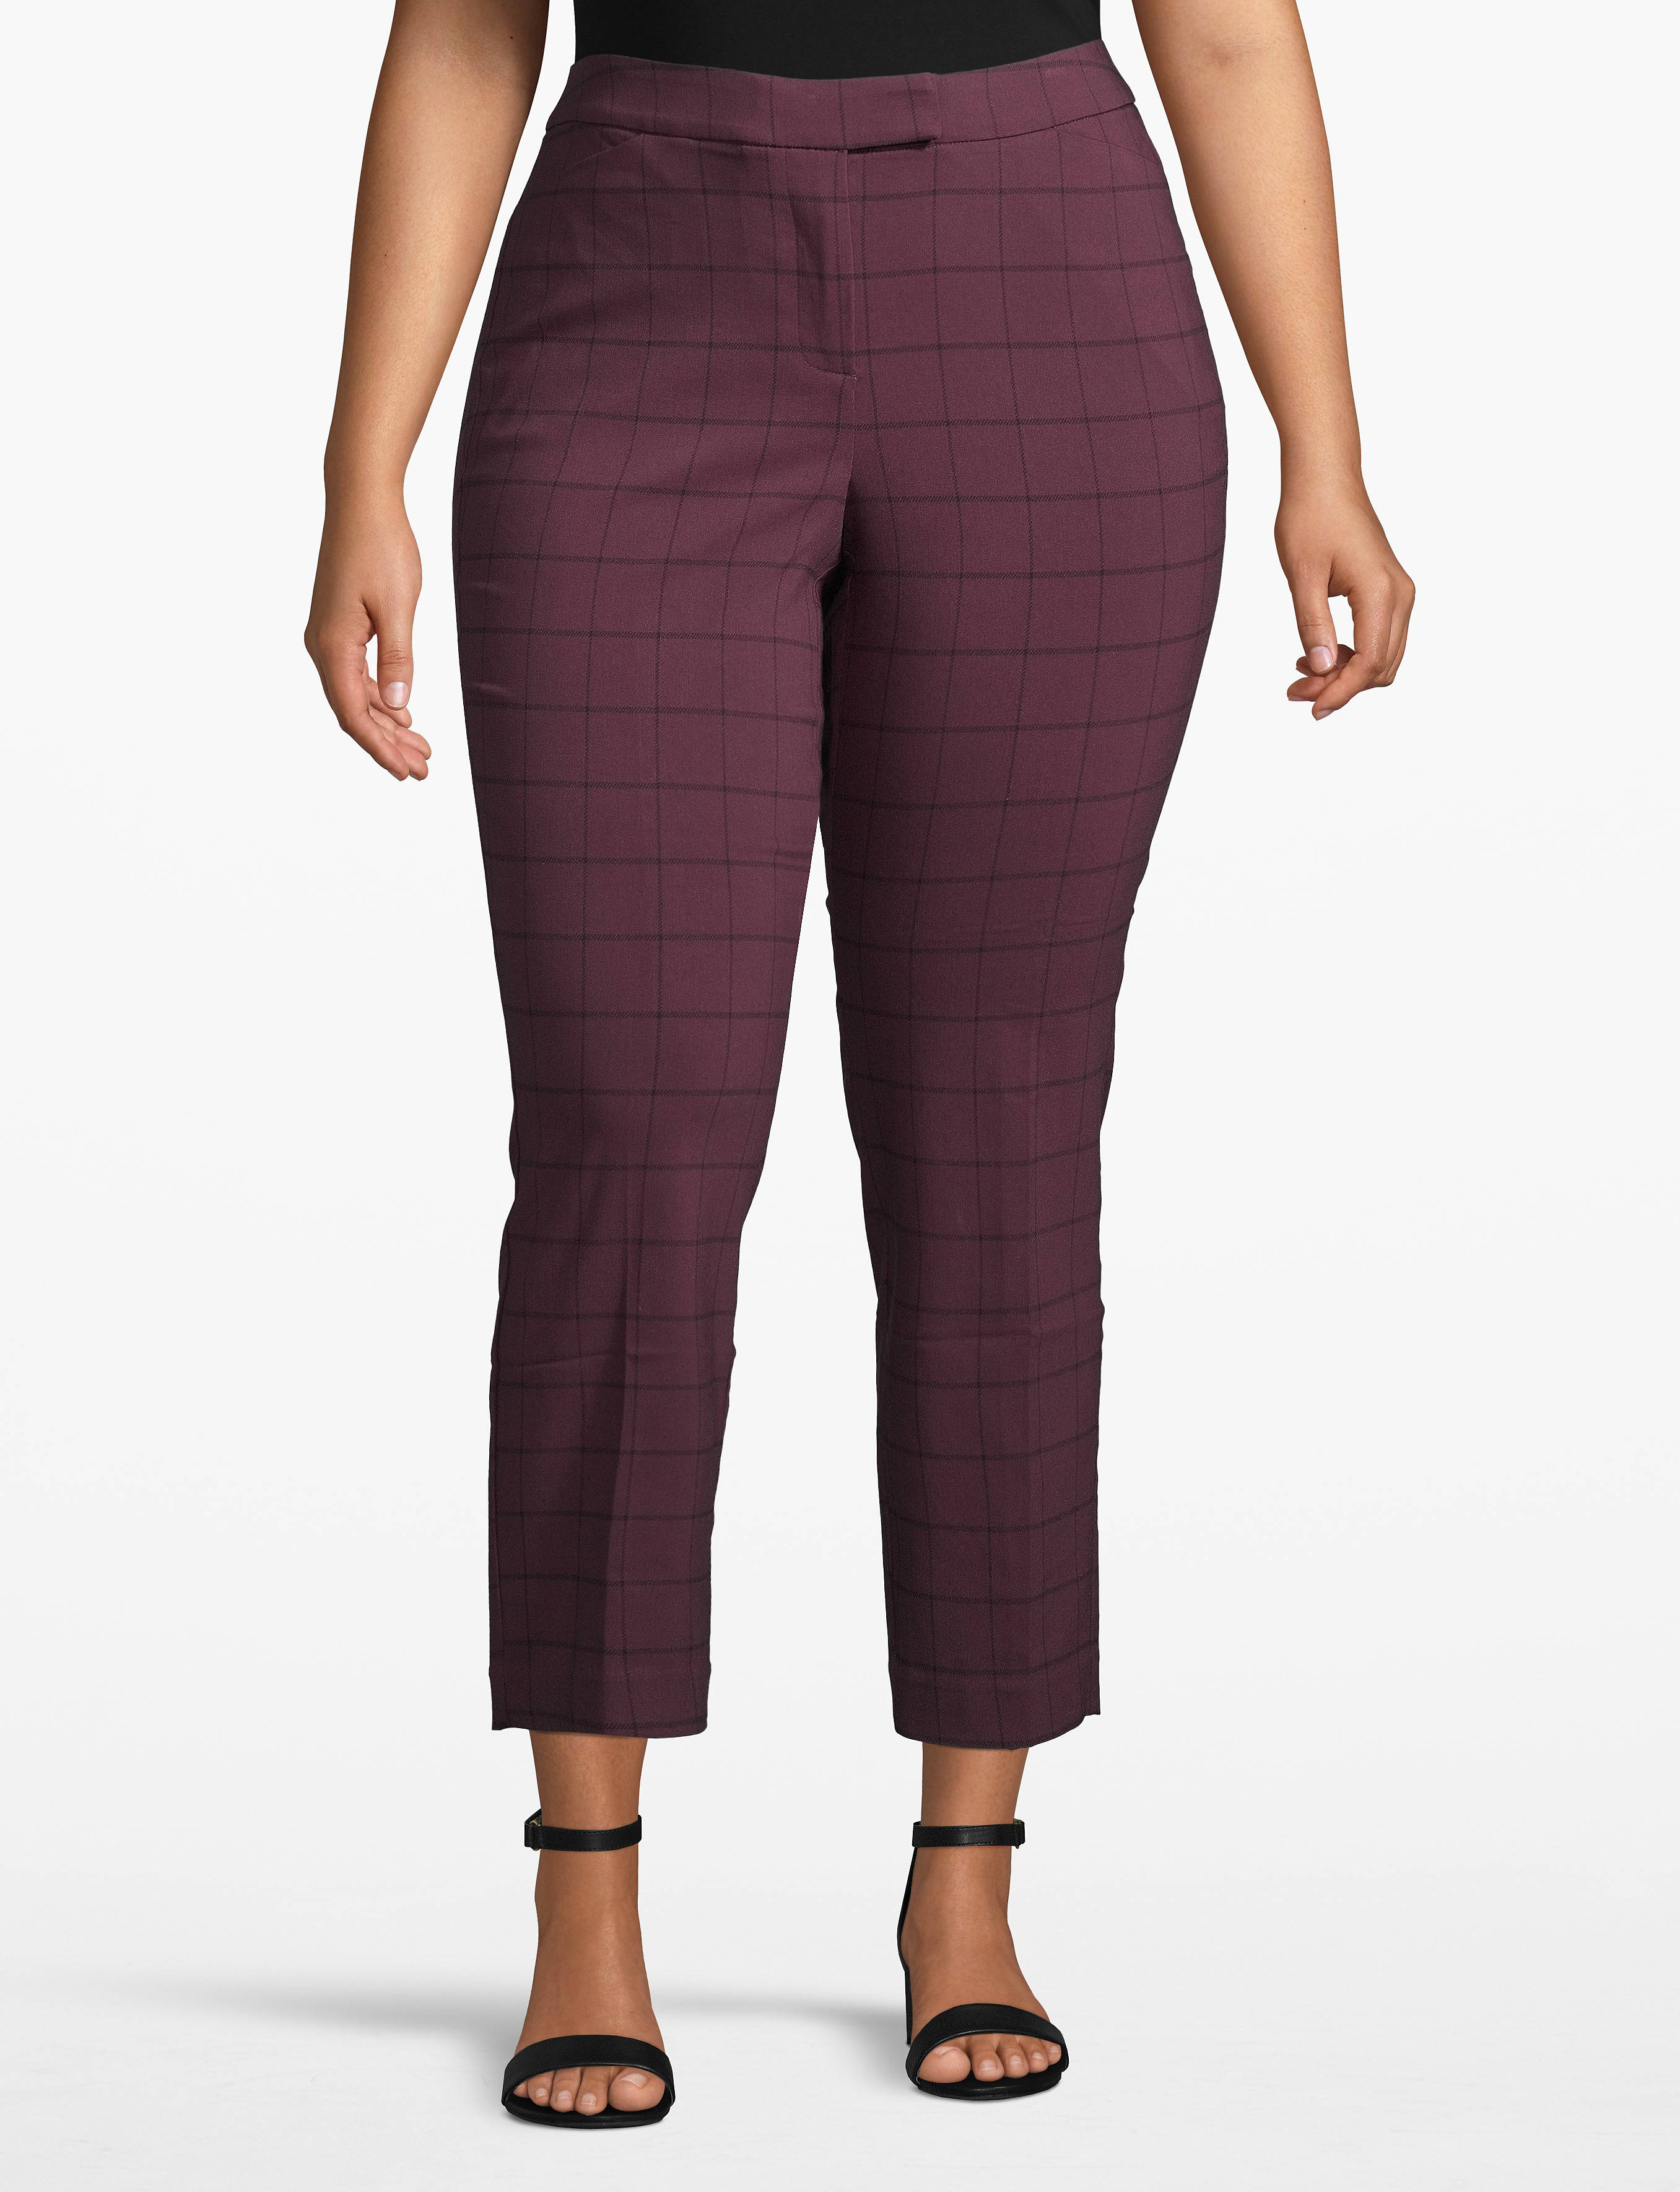 Ankle Pant (solid and printed):LBF20077_Windowpane_colorway3:14 Product Image 1